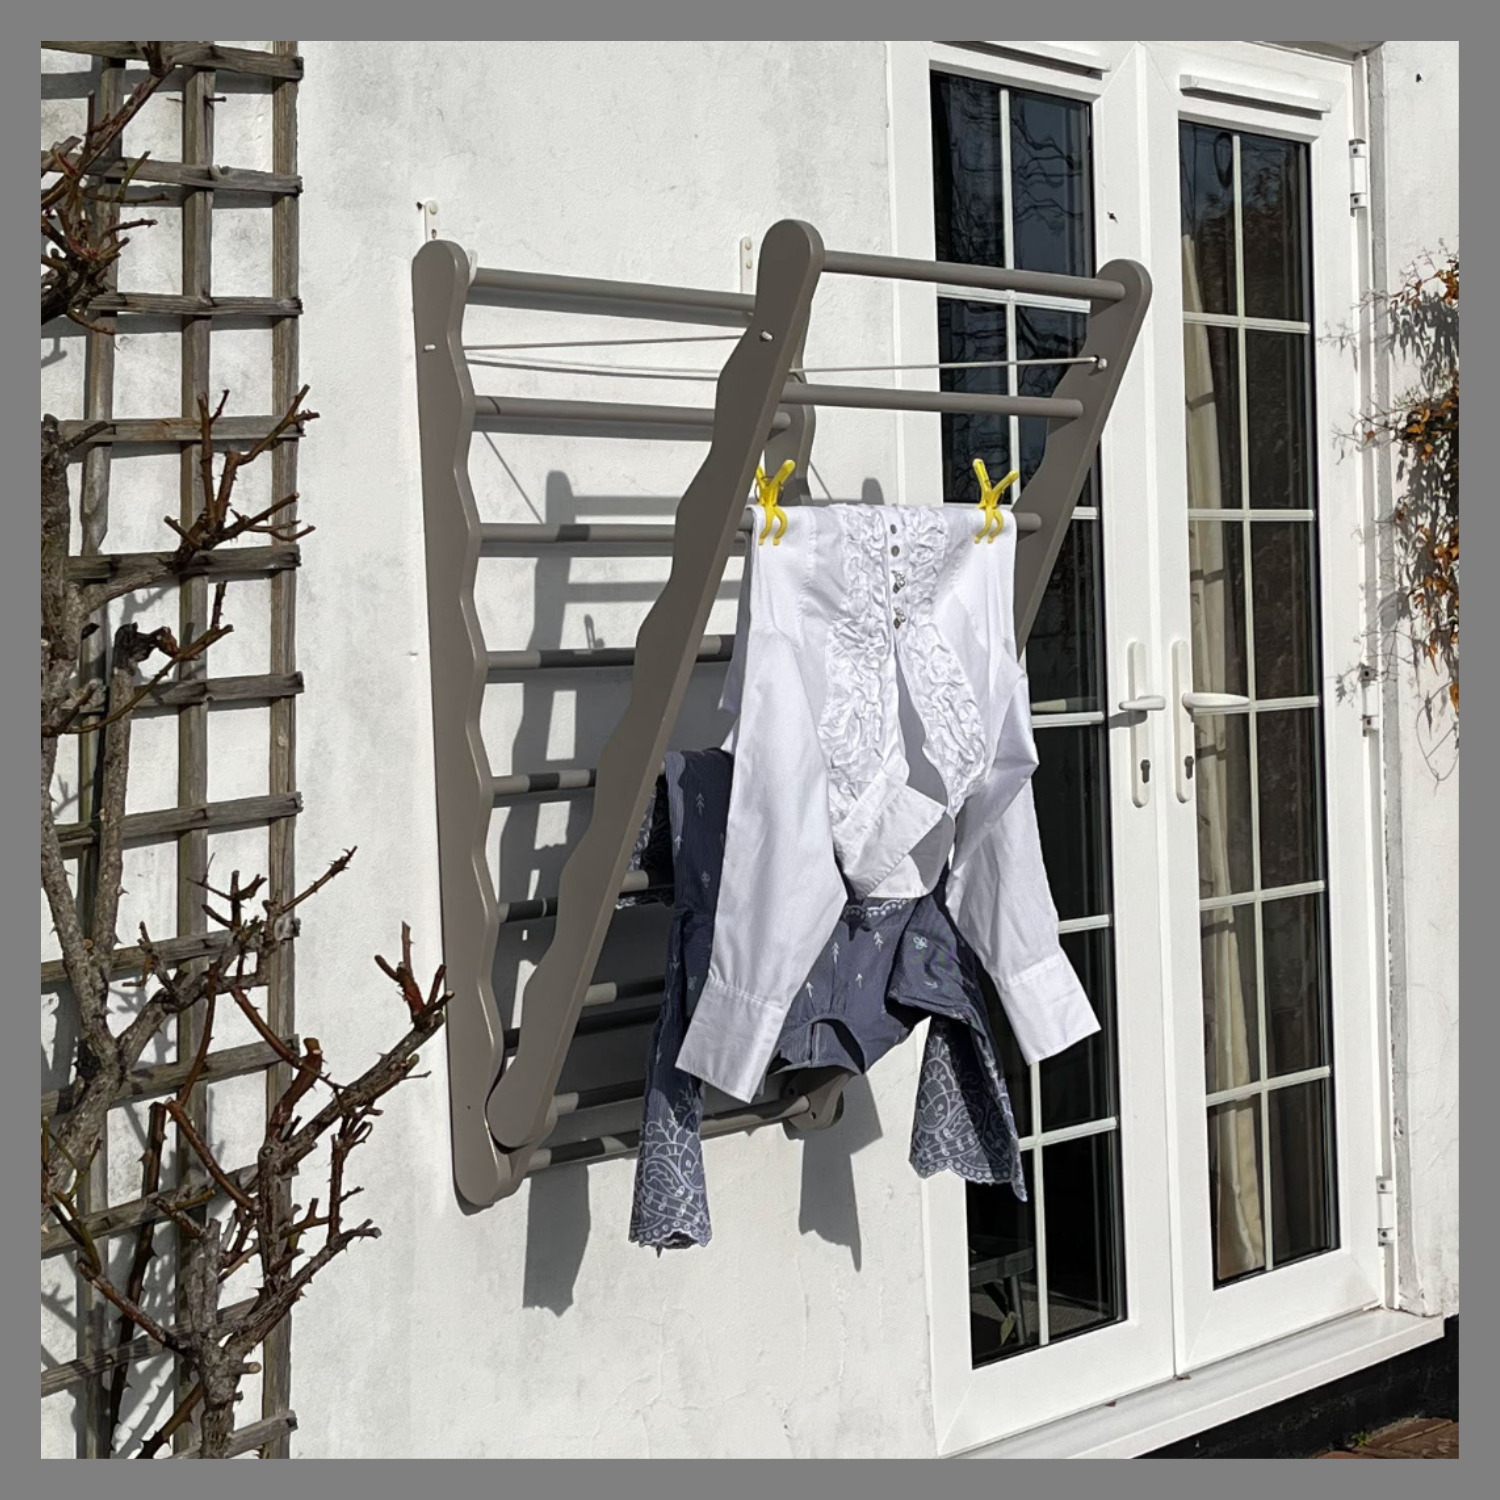 Julu Grey Laundry Ladder being used outside 